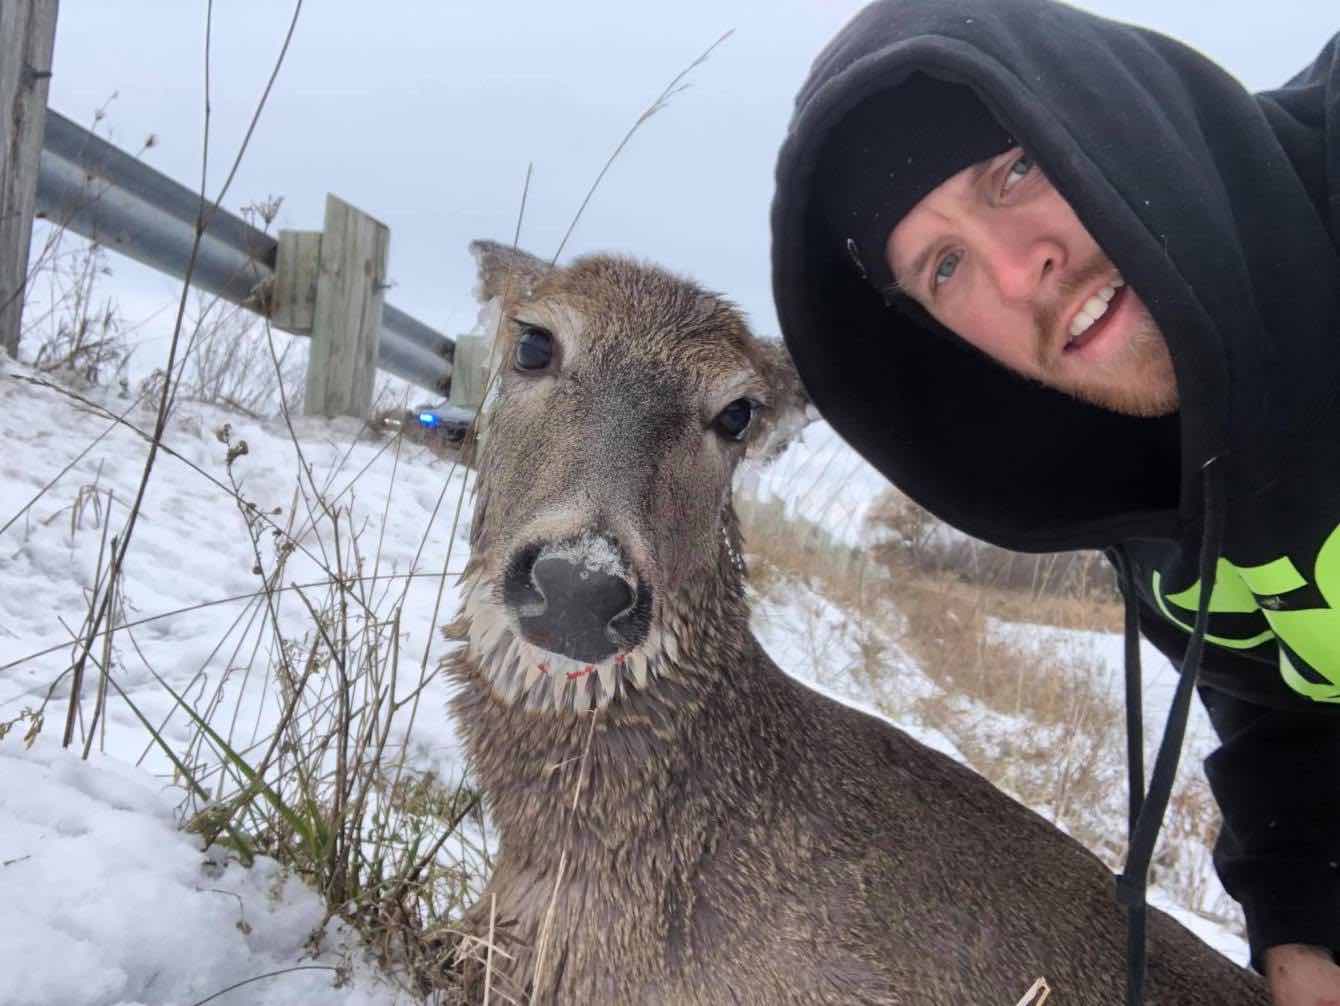 Couple rescue deer from frigid water in rowboat (Watch)